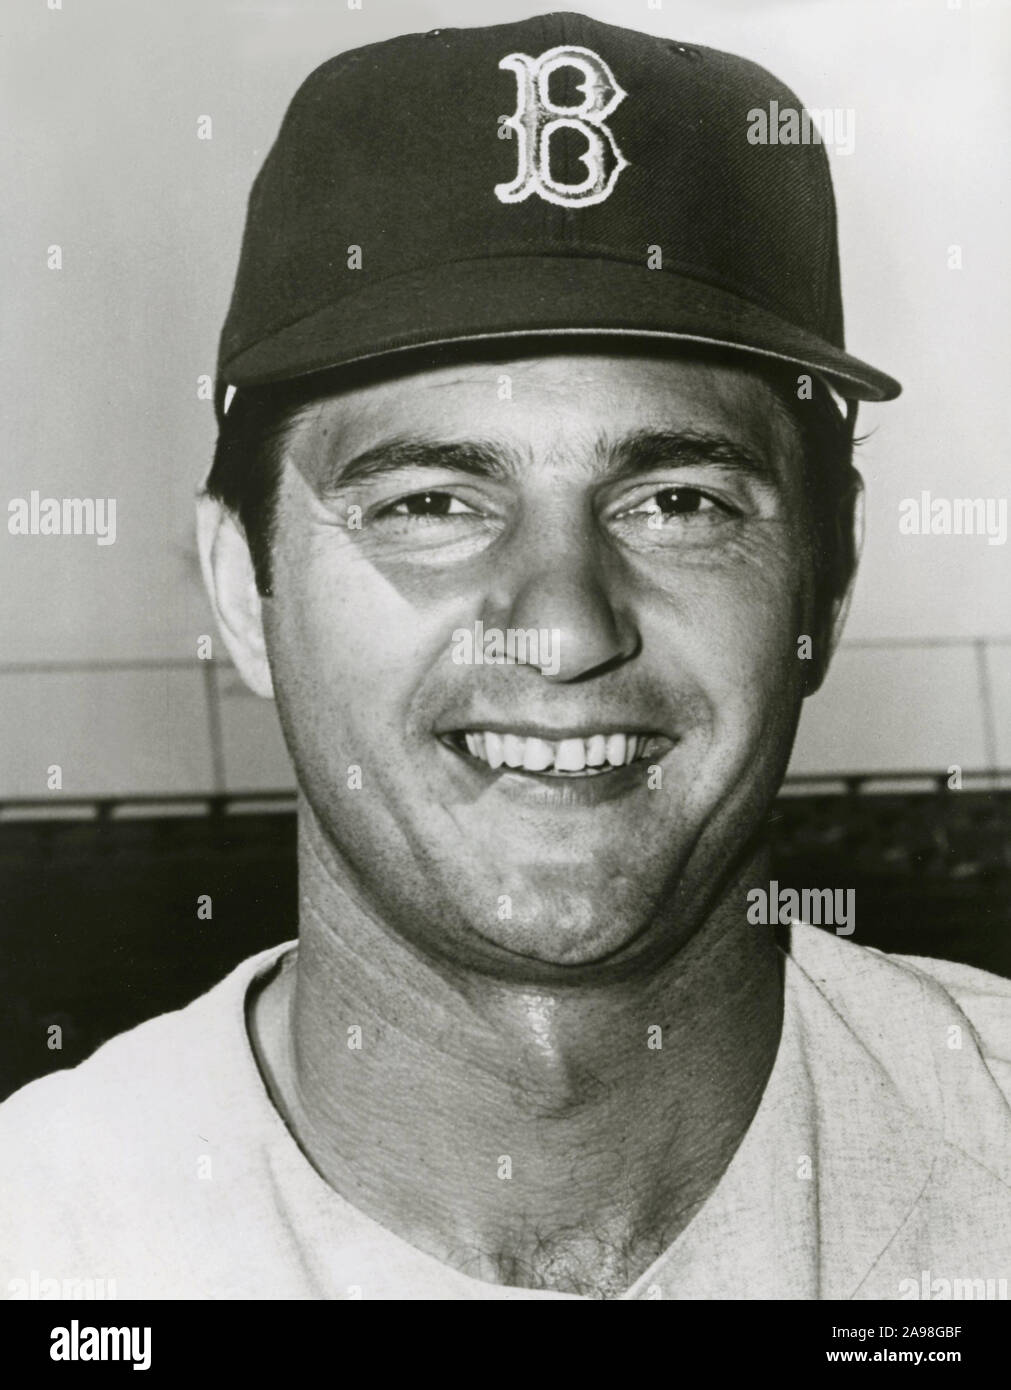 Vintage black and white photo of baseball player Carl Yastrzemski who was a star with the Boston Red Sox in the 1960s and 70s. Stock Photo